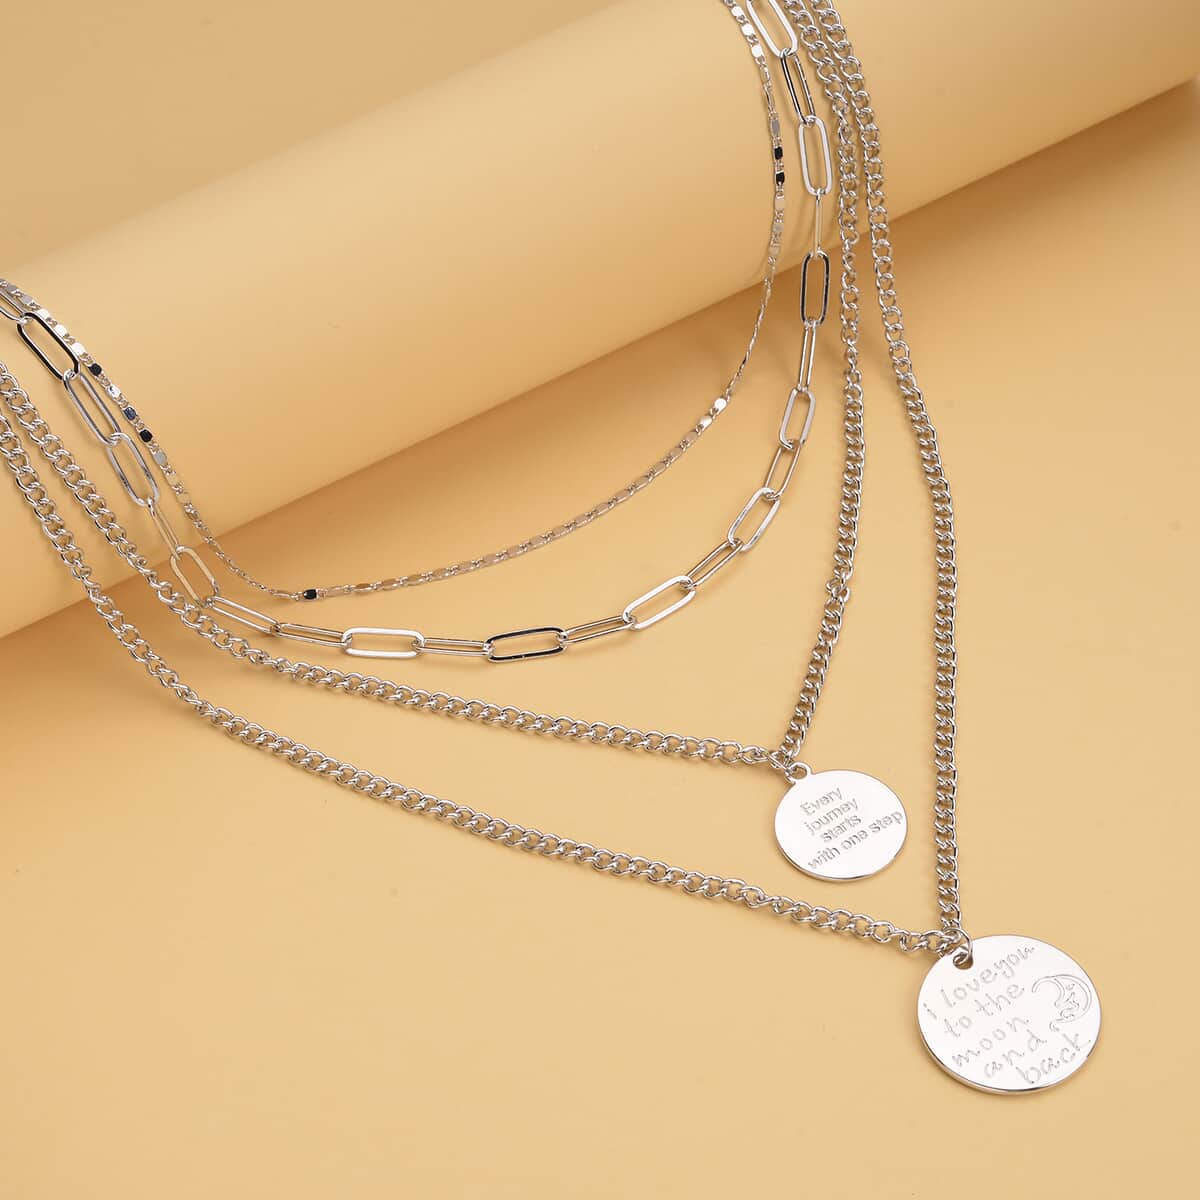 Metallic Plate with Engraved Message & Cameo Charm Layered Link Chain Necklace 18.5-20.5 Inches in Rosetone image number 1